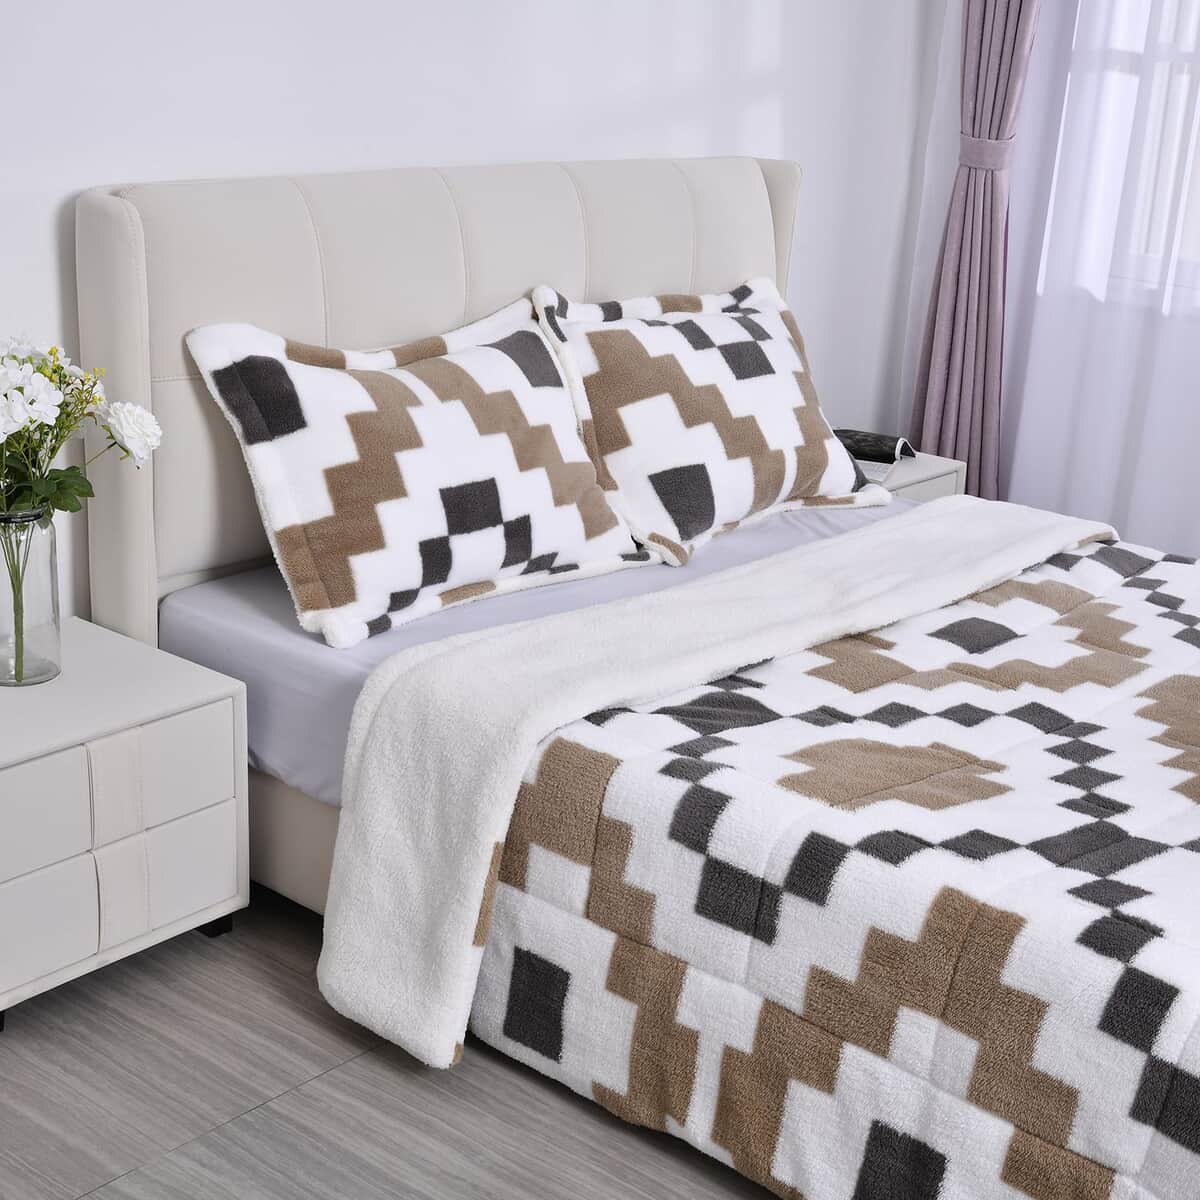 Homesmart Set of 3 Camel Checkered Color Printed Sherpa Comforter and Pillowcase image number 1